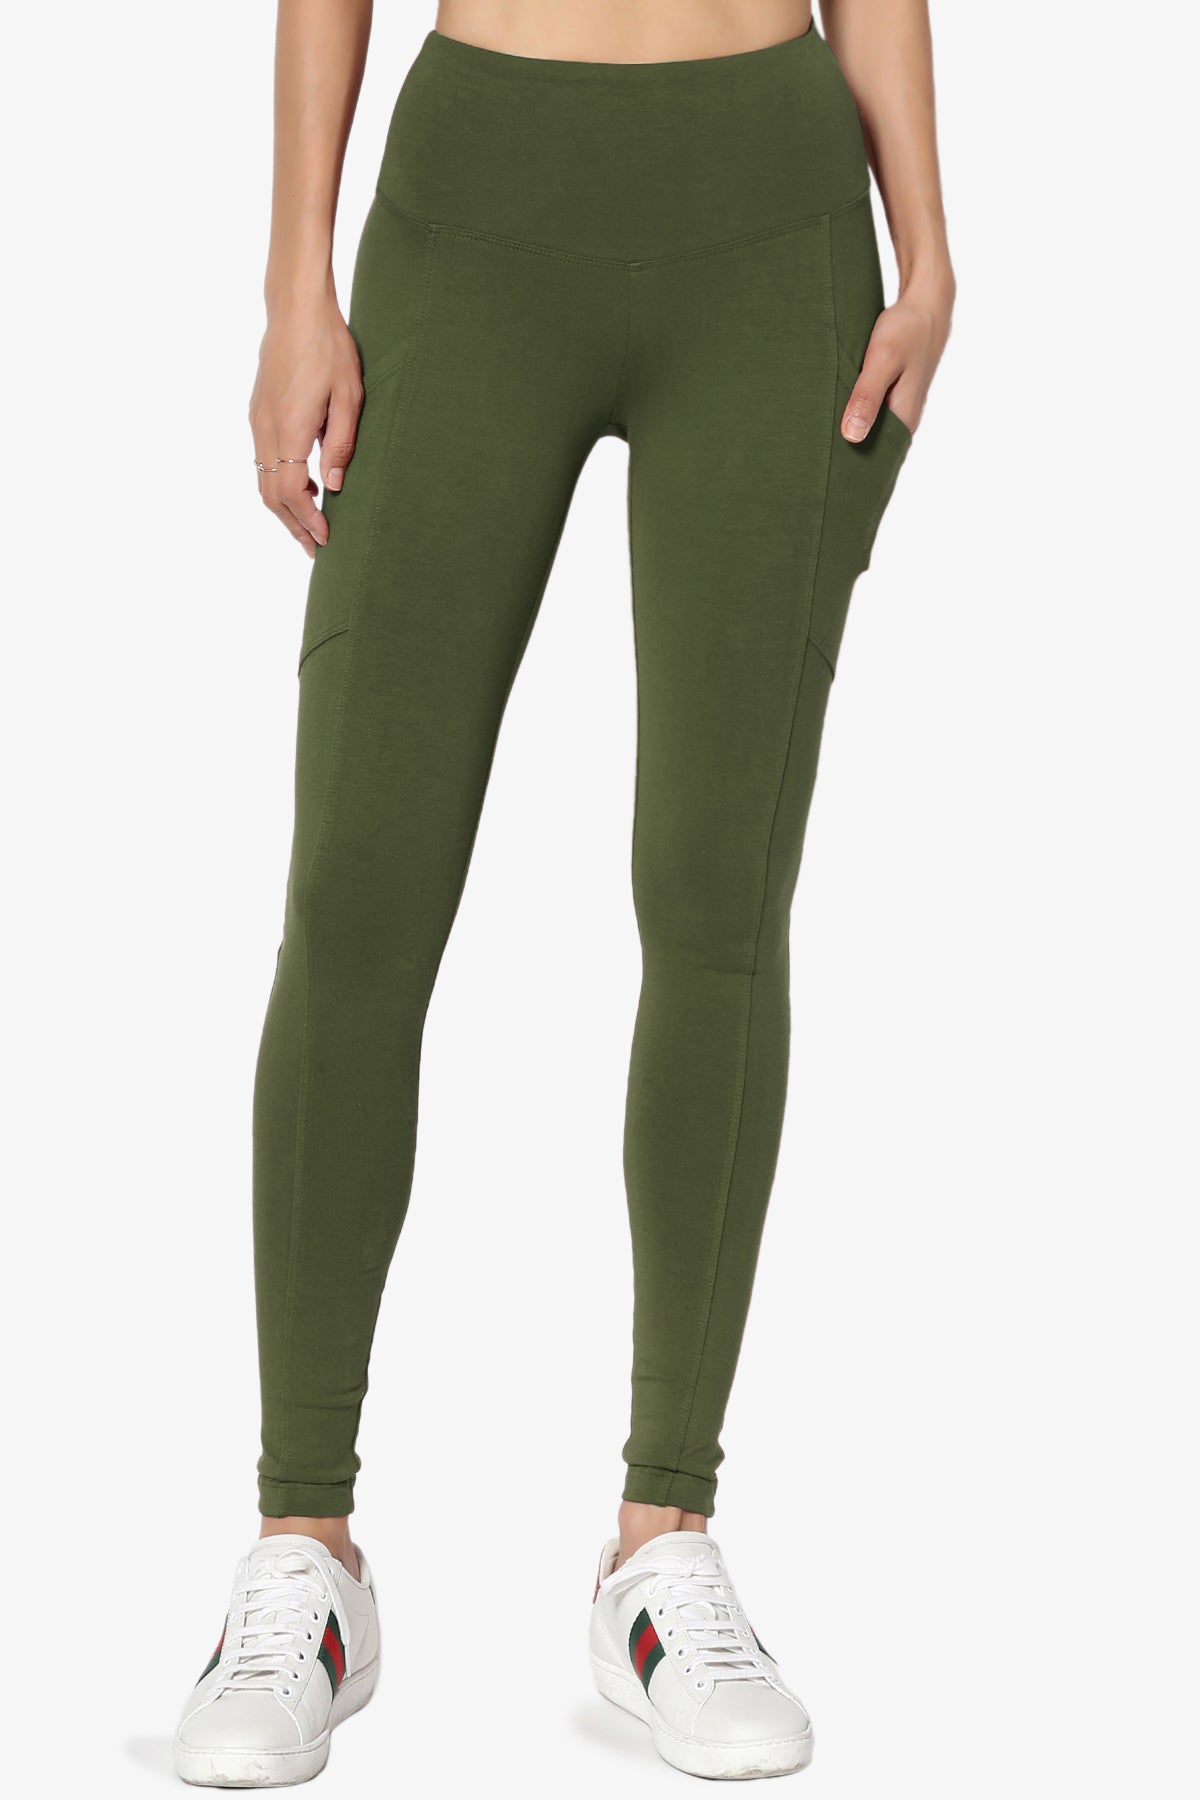 Load image into Gallery viewer, Ansley Luxe Cotton Leggings with Pockets ARMY GREEN_3
